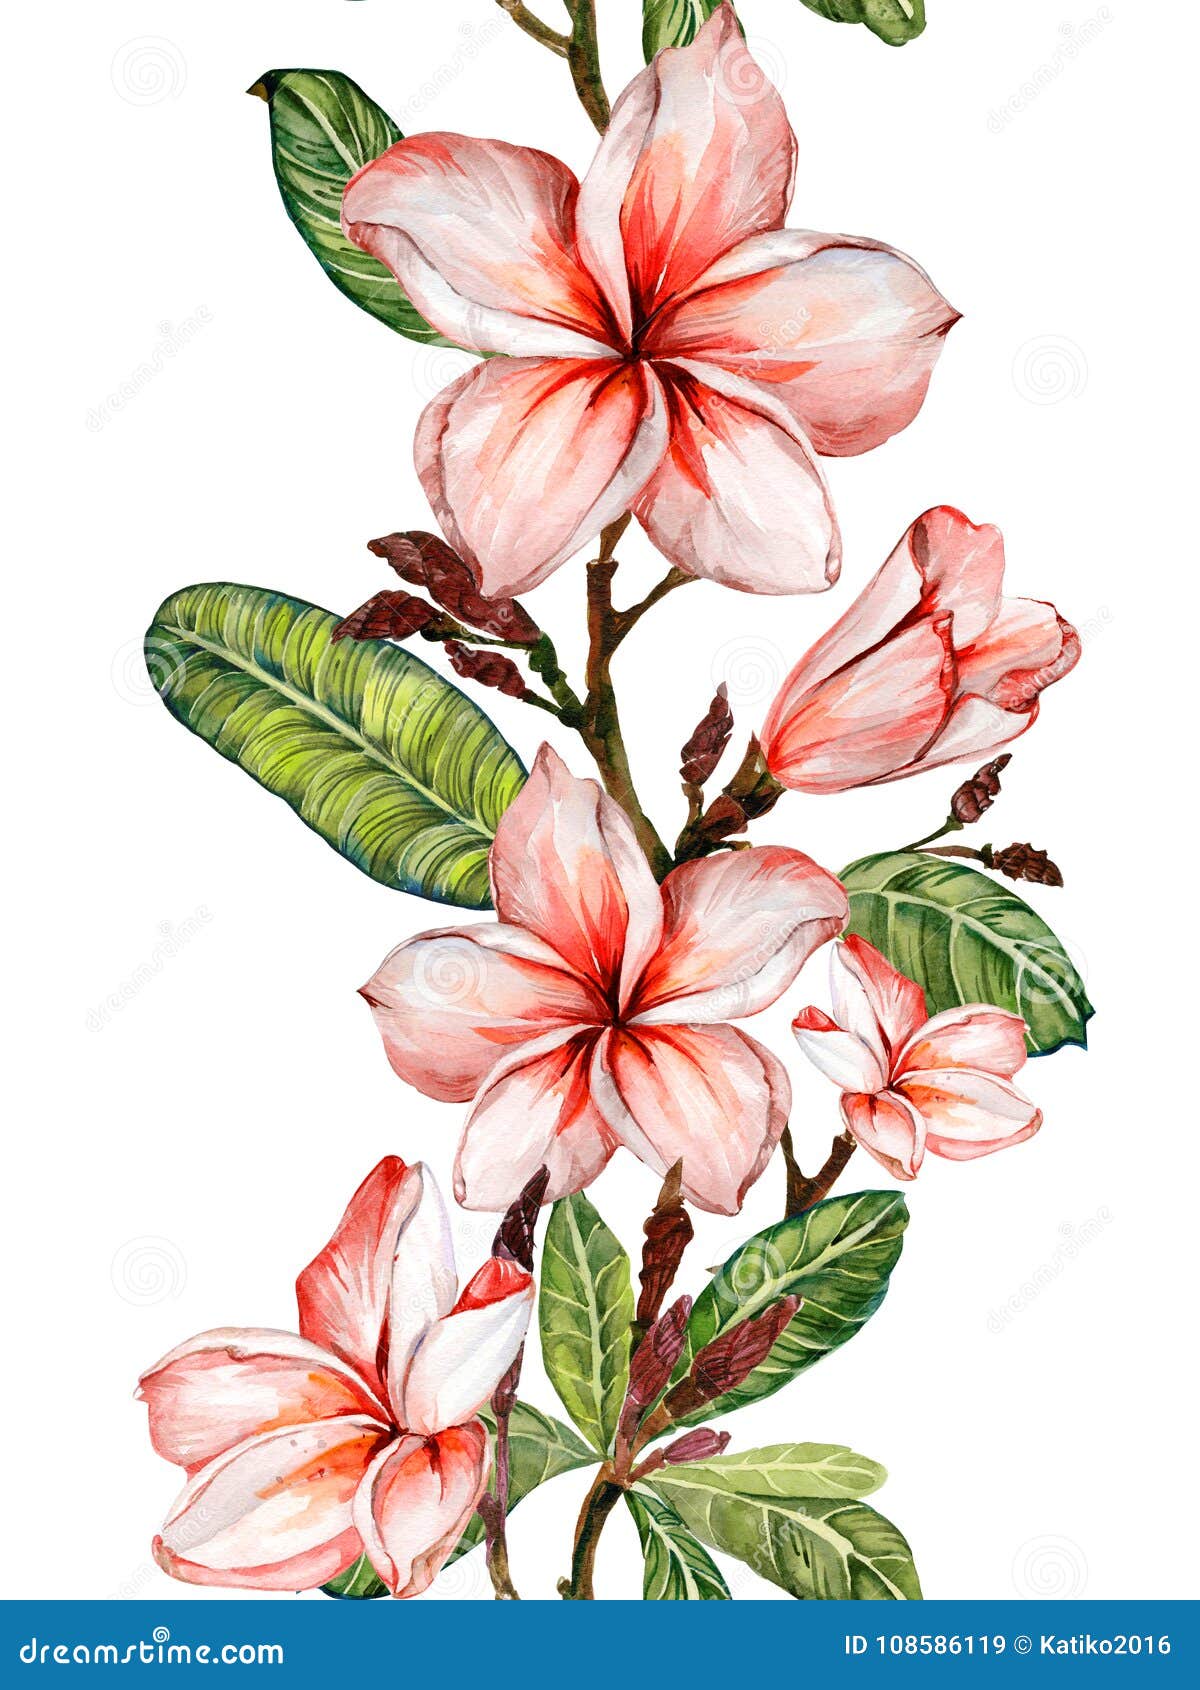 plumeria flower on a twig. border . seamless floral pattern.  on white background. watercolor painting.